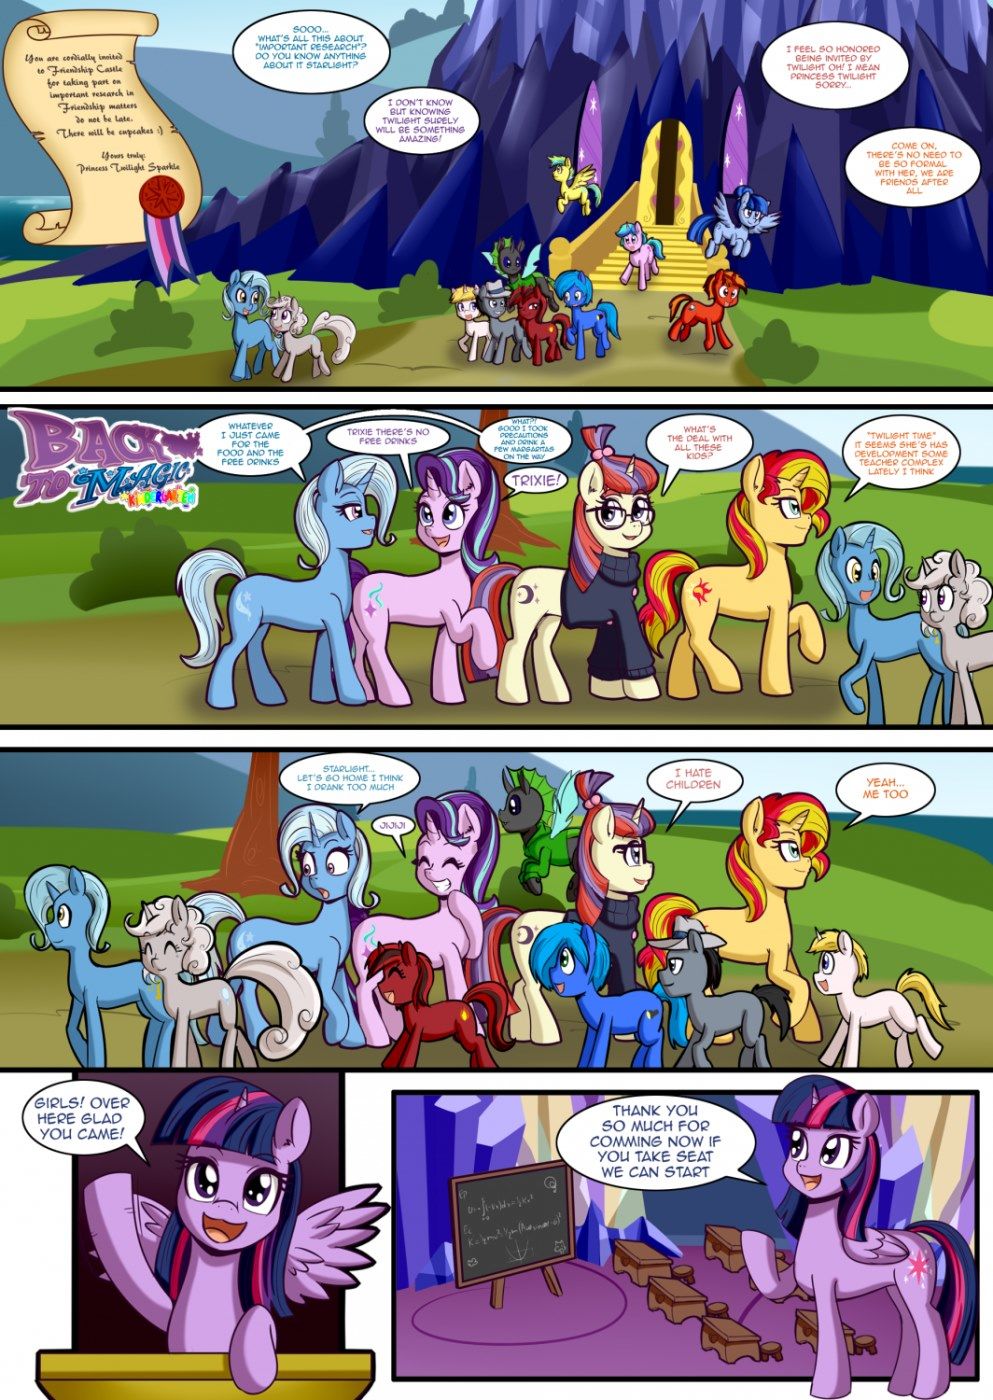 Back to Magic Kindergarten - Little Pony page 3